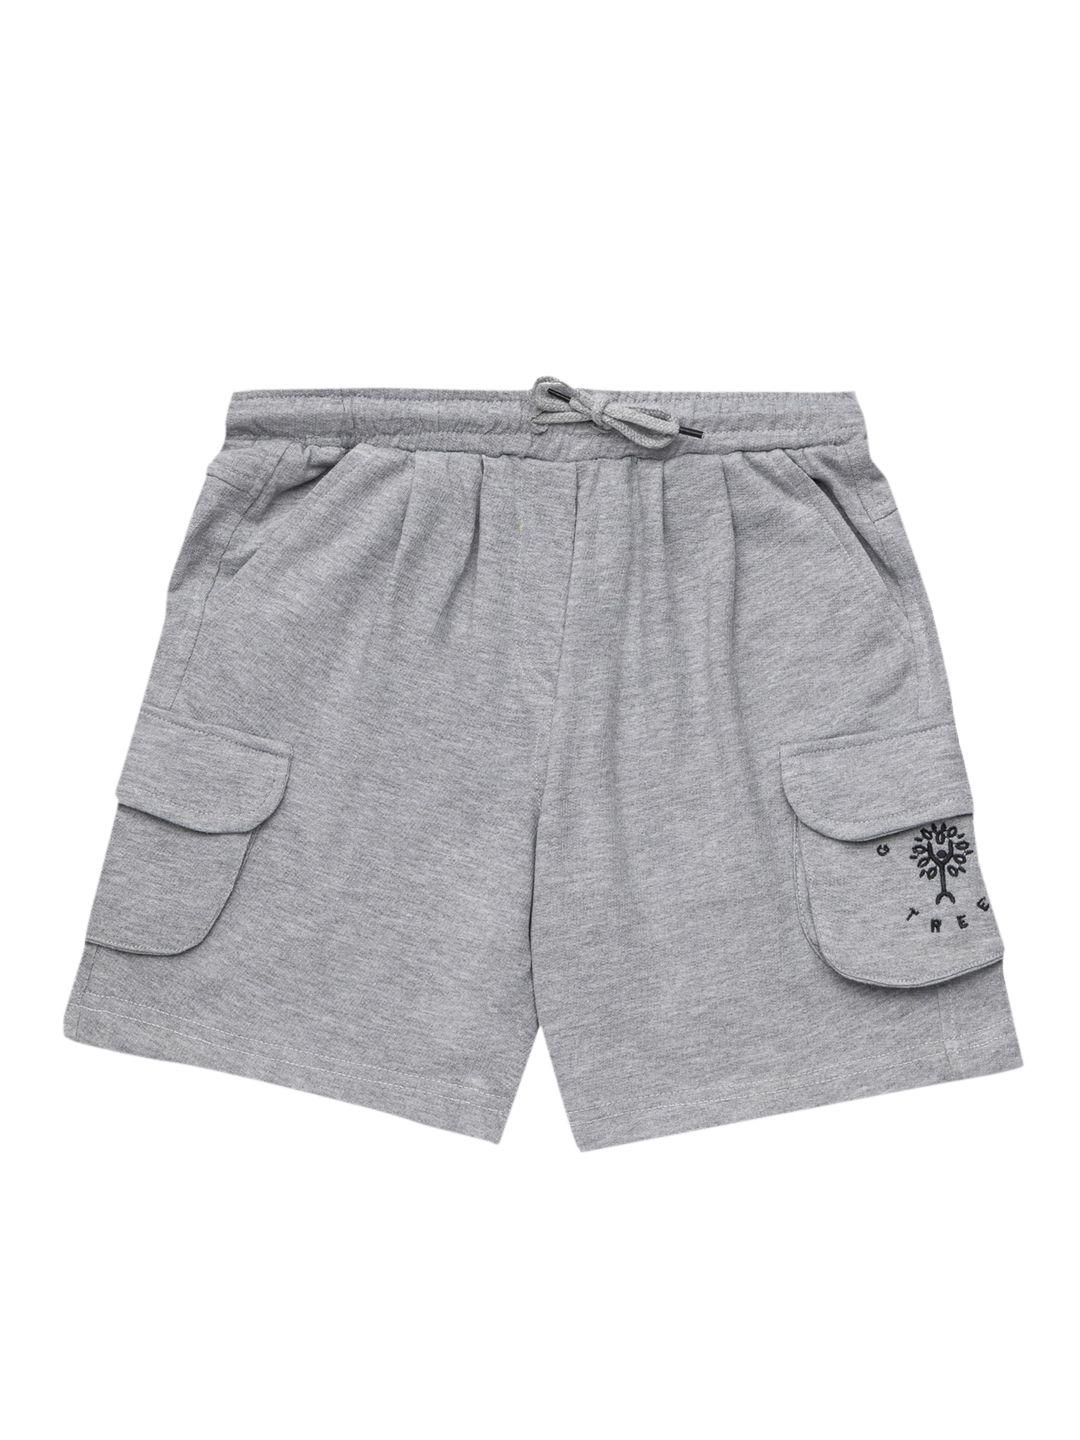 growing tree unisex kids grey melange outdoor antimicrobial technology shorts